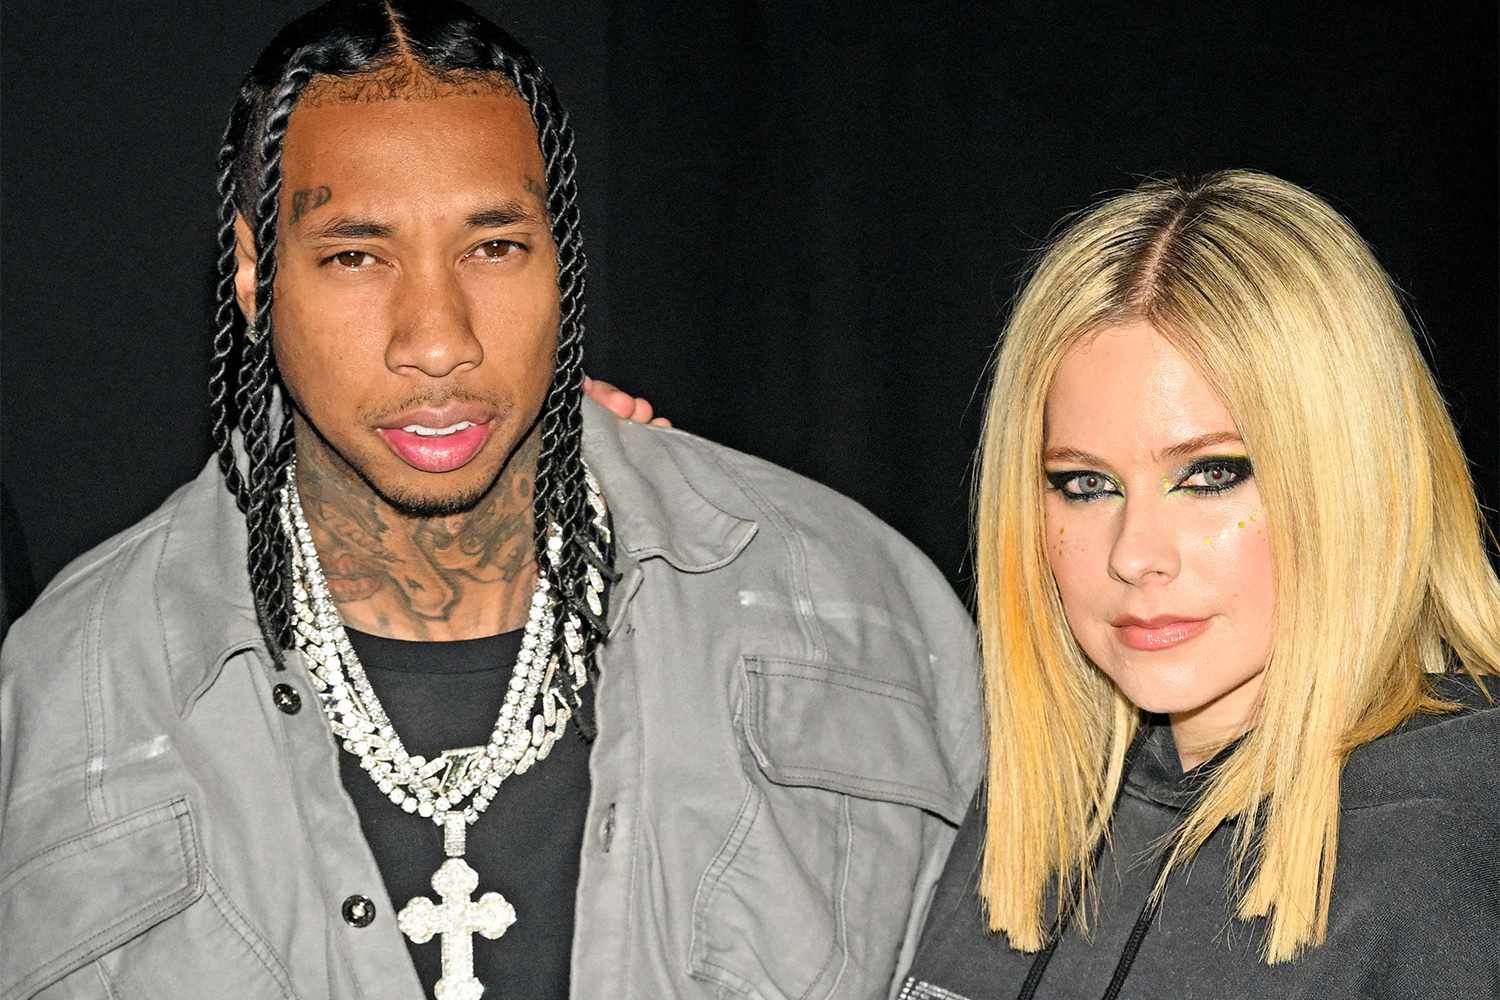 PARIS, FRANCE - MARCH 06: Tyga and Avril Lavigne attend the Mugler x Hunter Schafer party as part of Paris Fashion Week at Pavillon des Invalides on March 06, 2023 in Paris, France. (Photo by Stephane Cardinale - Corbis/Corbis via Getty Images)